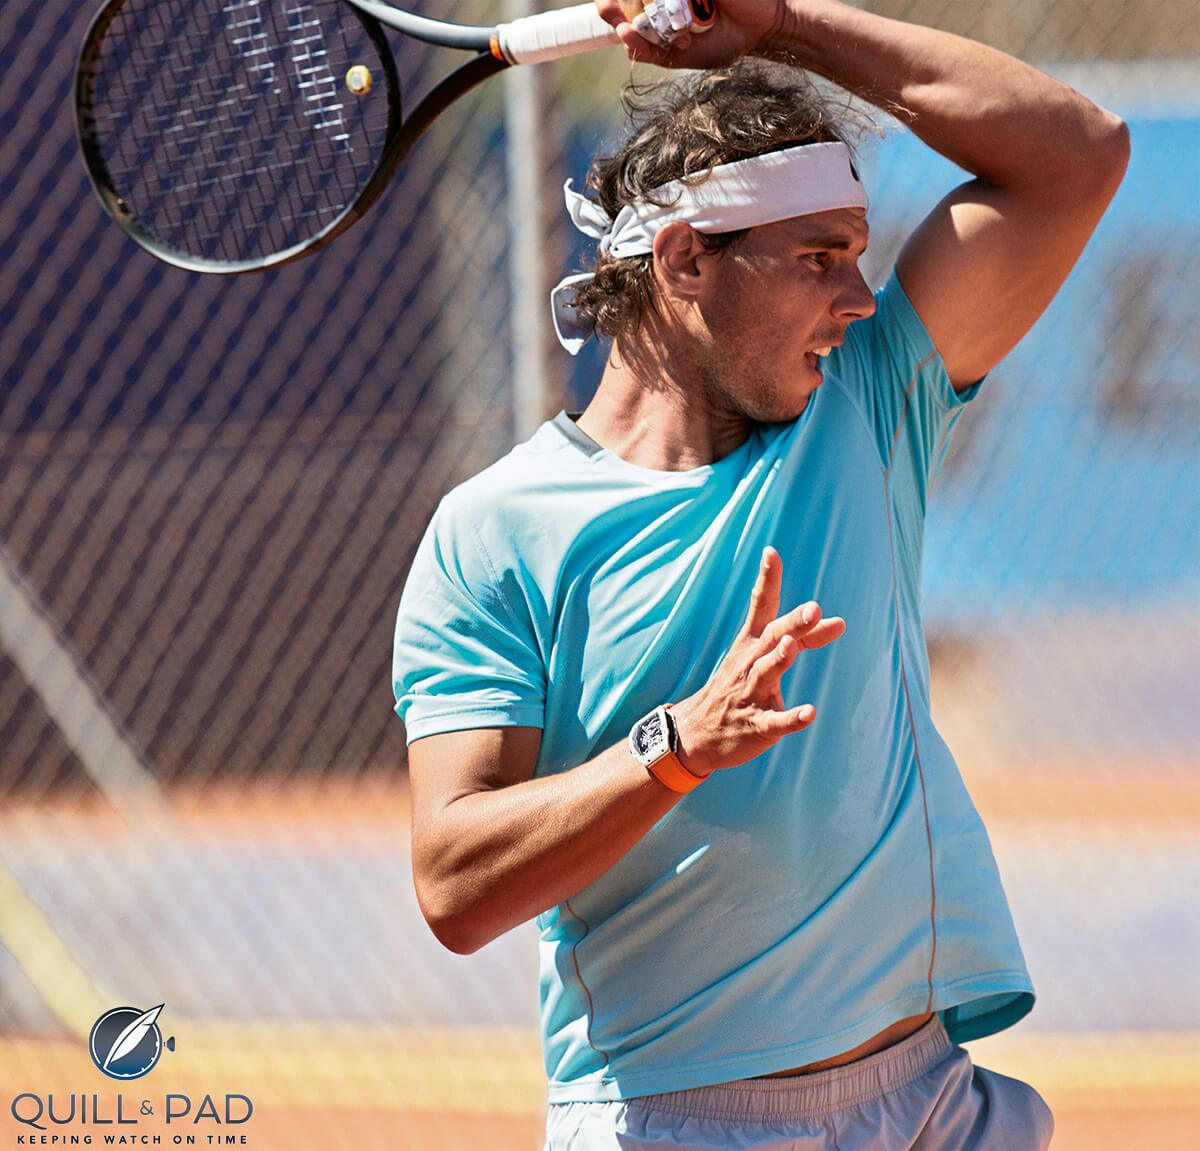 Rafael Nadal's energetic style of tennis is the ultimate test for the Richard Mille RM 27-02 RN